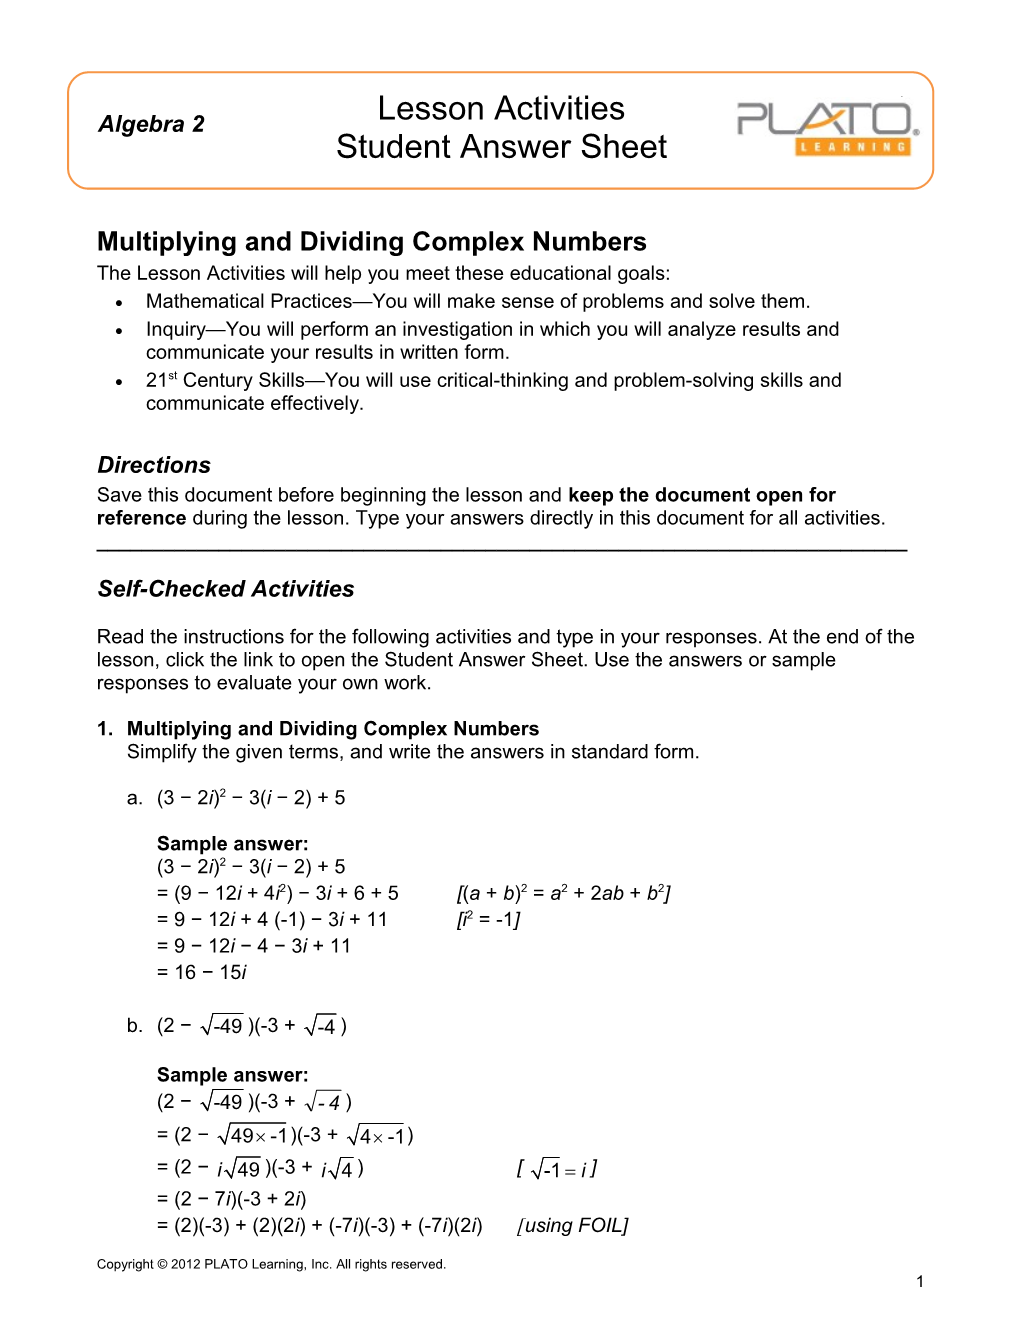 Multiplying and Dividing Complex Numbers